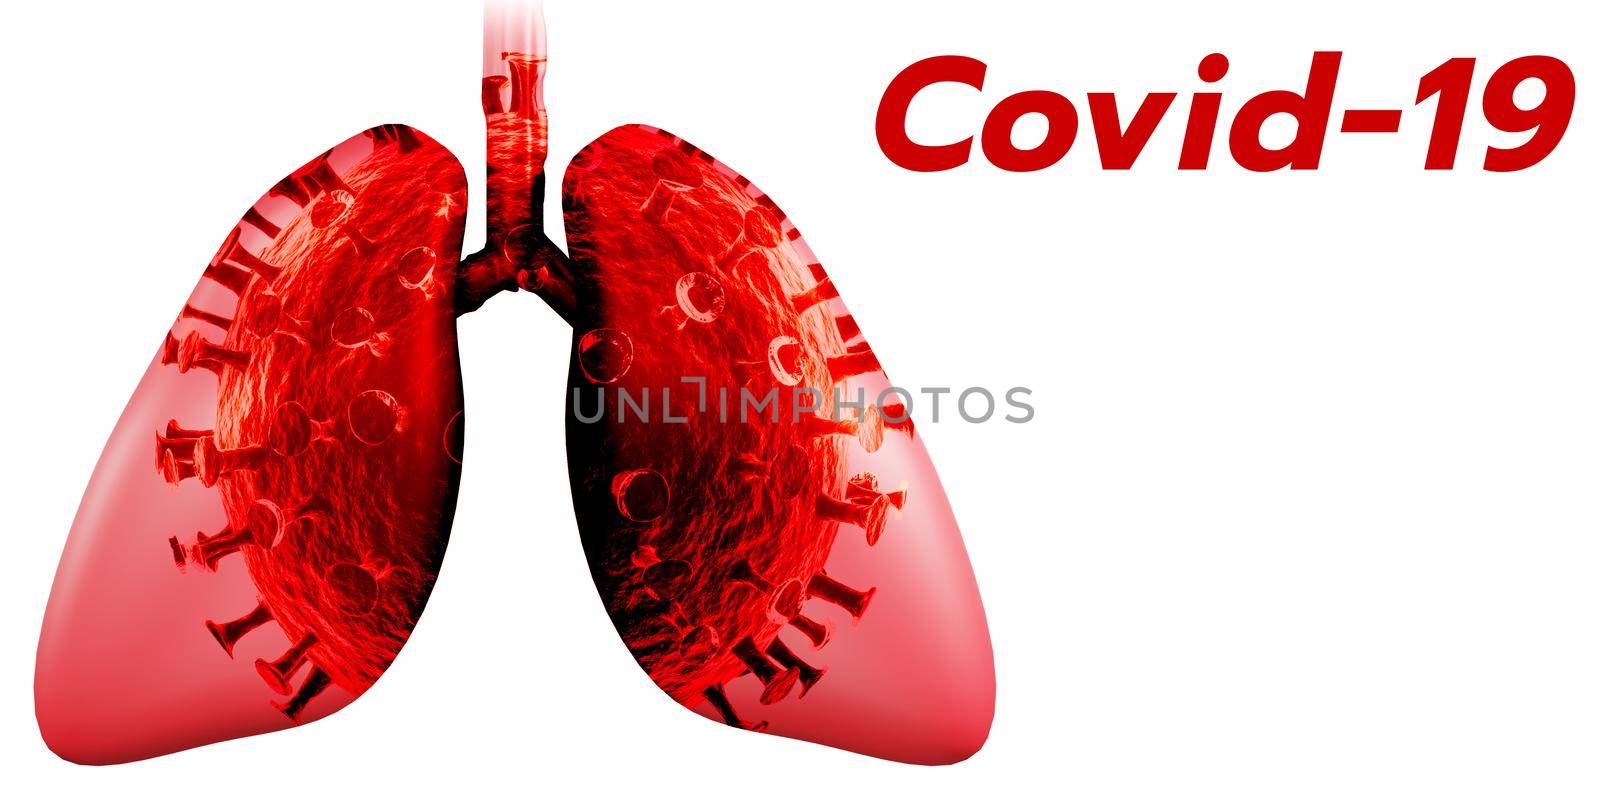 Red text COVID-19 with virus in lung graphic on white background, name for Coronavirus disease. 3D by sirawit99